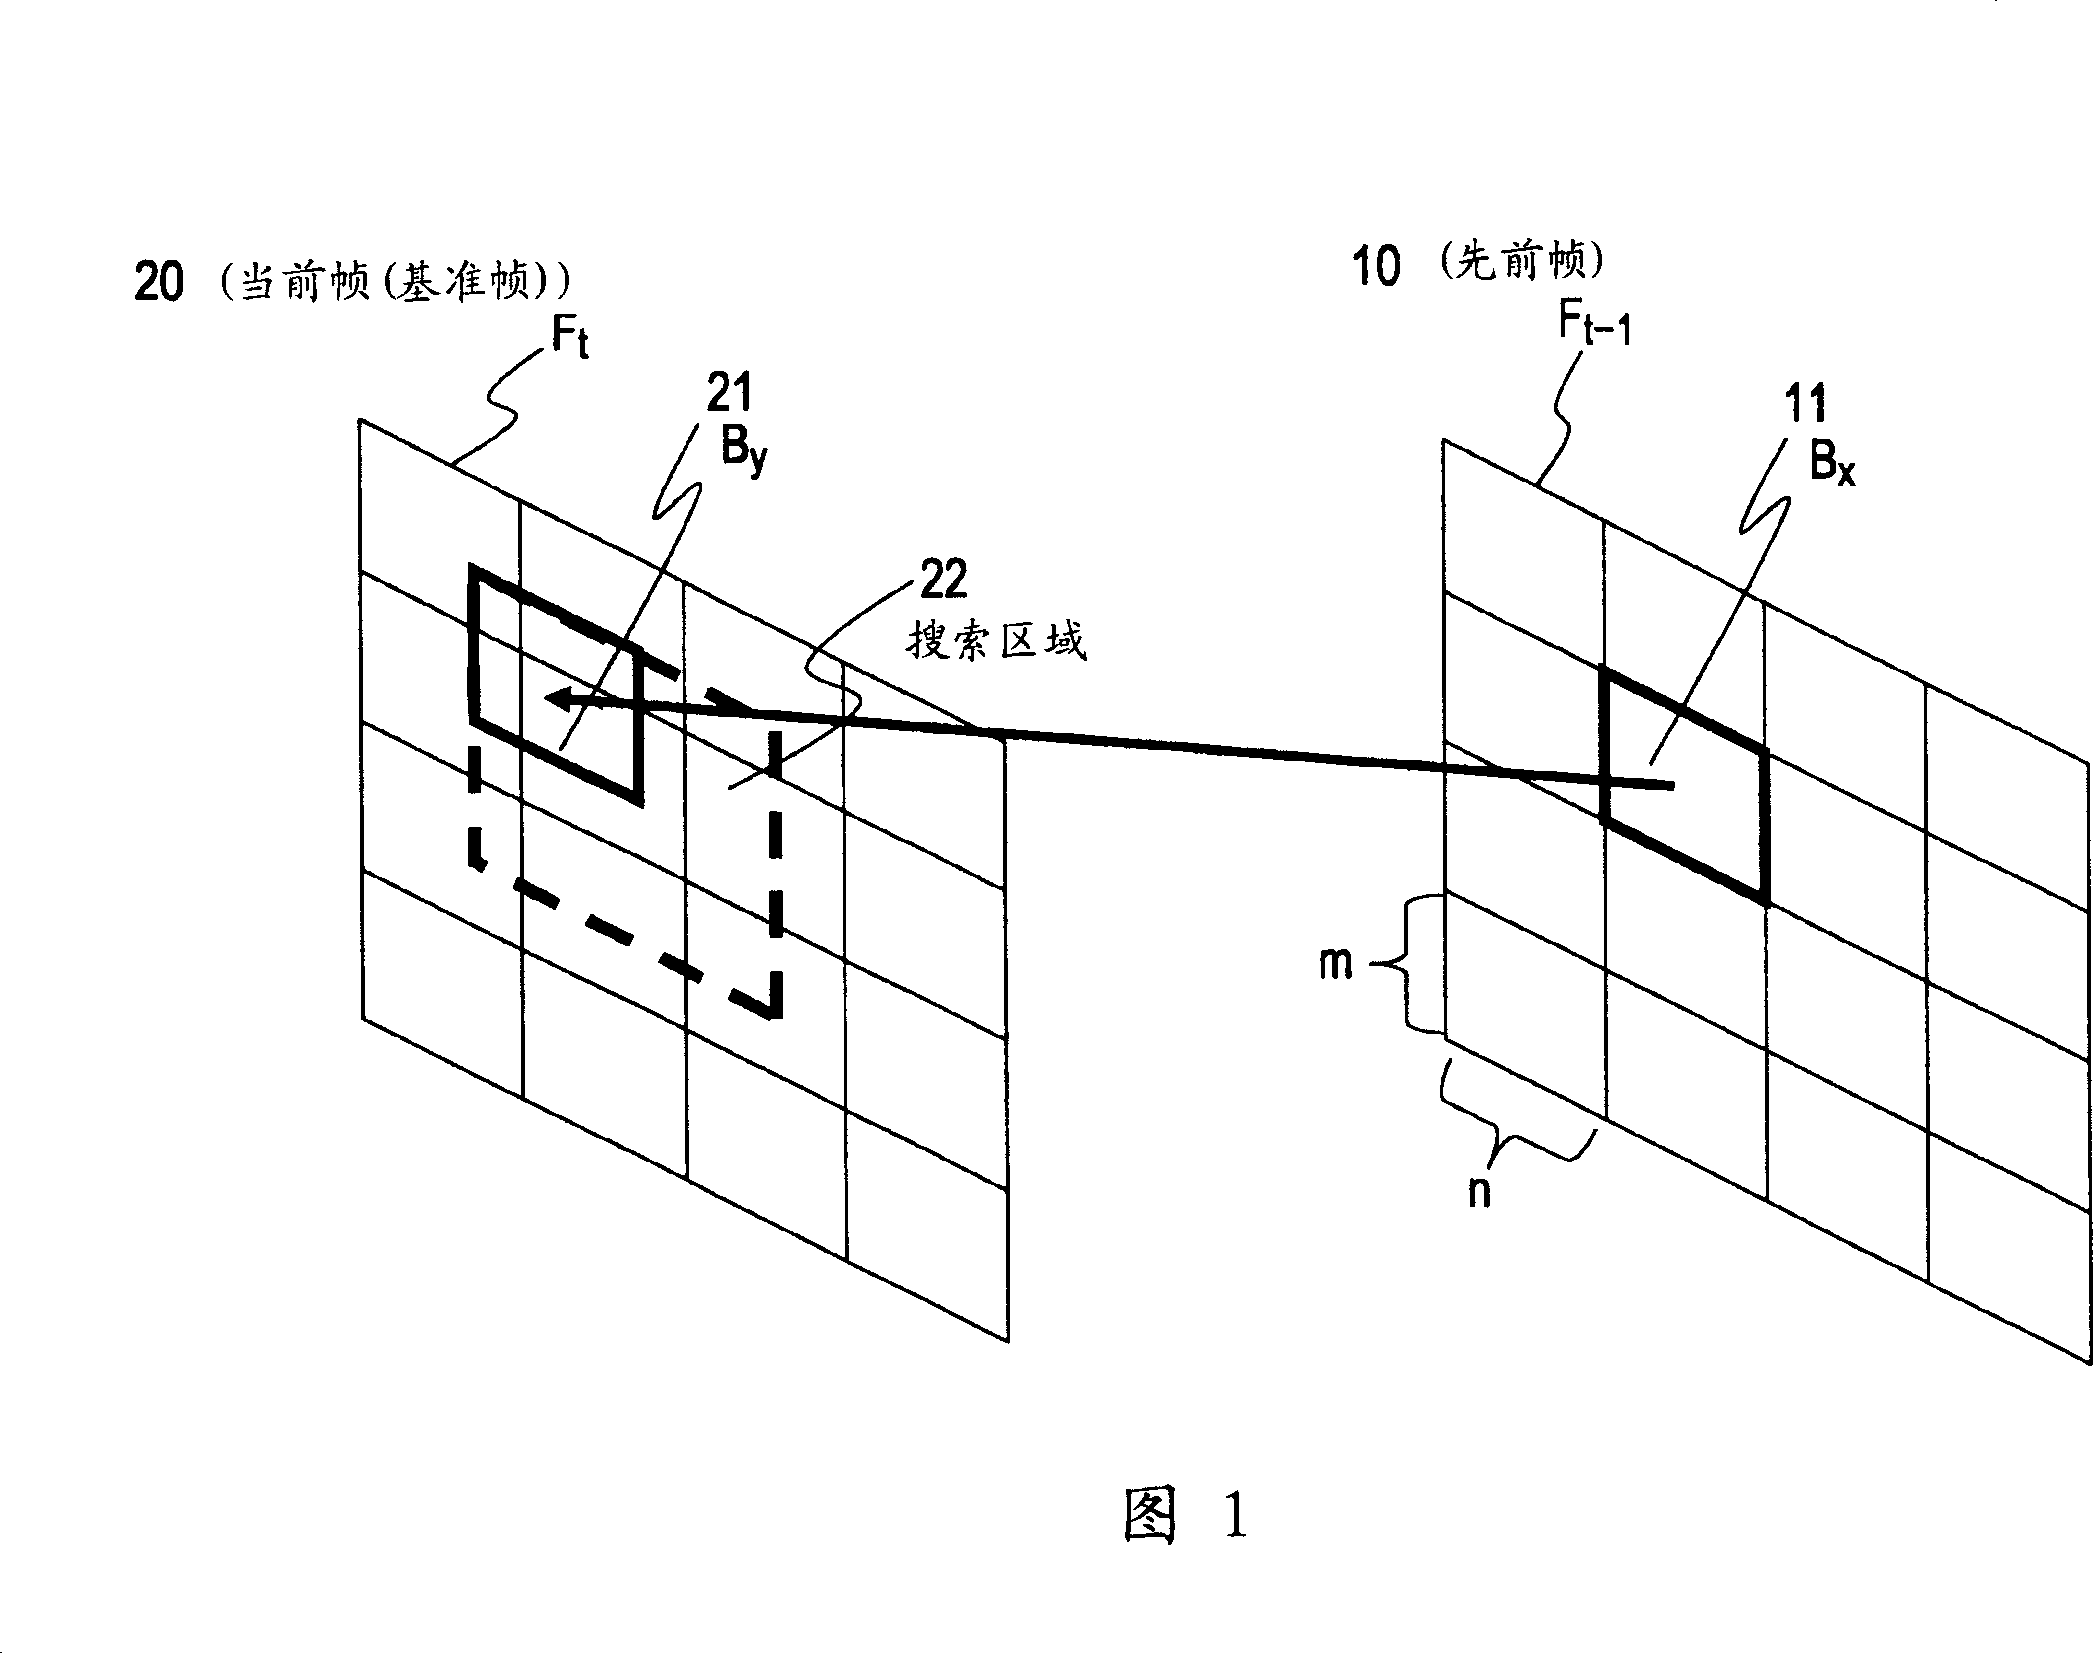 Motion vector detecting apparatus, motion vector detection method and computer program